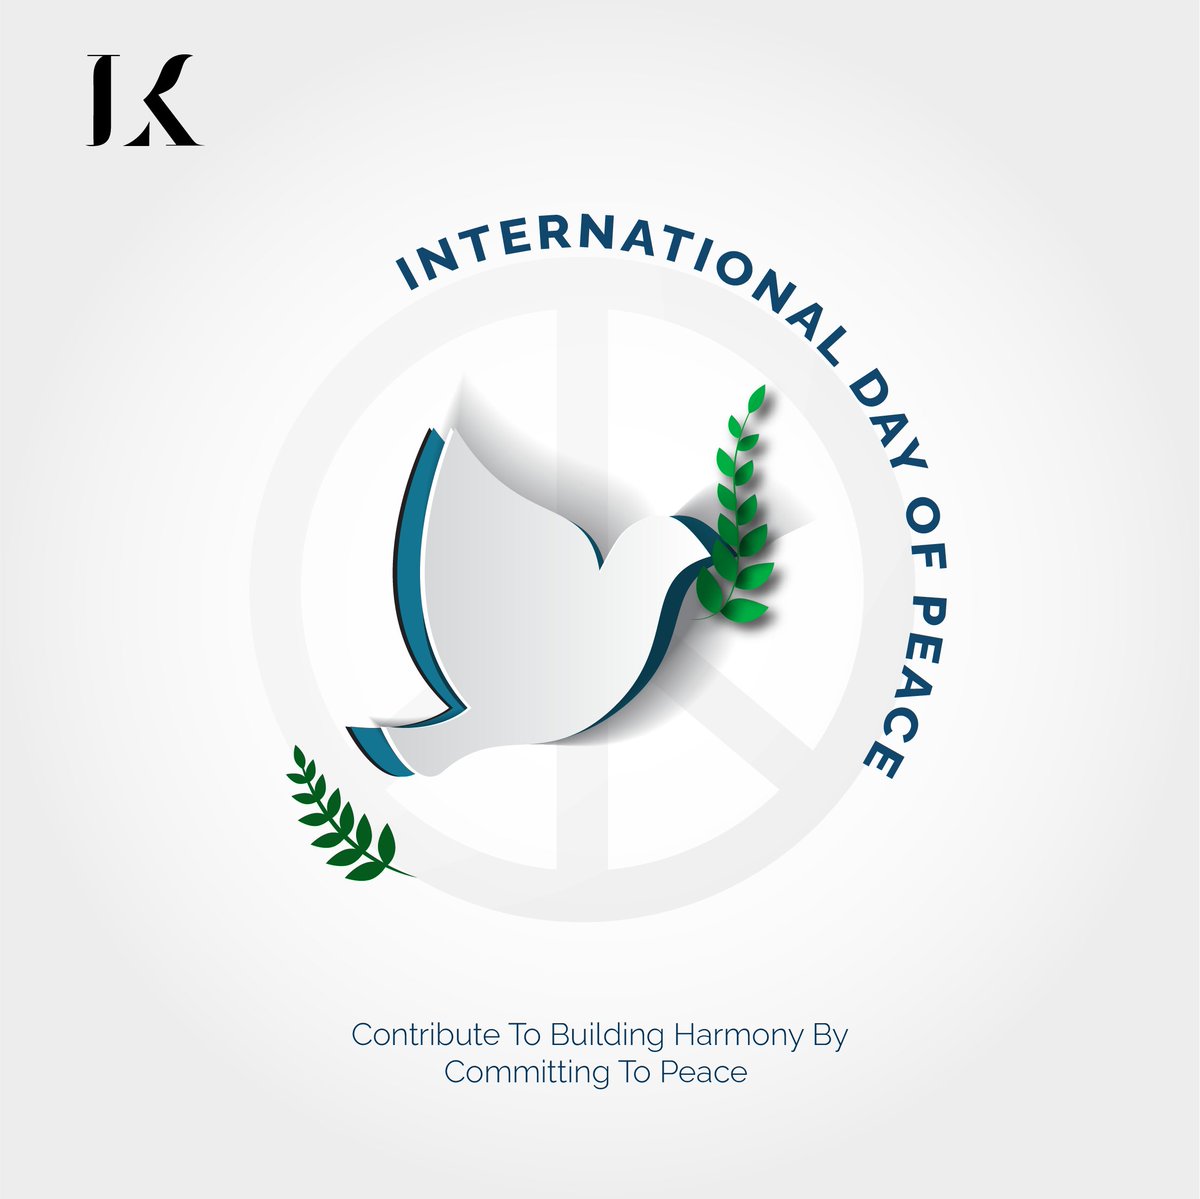 Together we can build a world that is peaceful and united. 

#LipiKhandhar #KnowyourRights #InternationalDayOfPeace #Peace #DayOfPeace